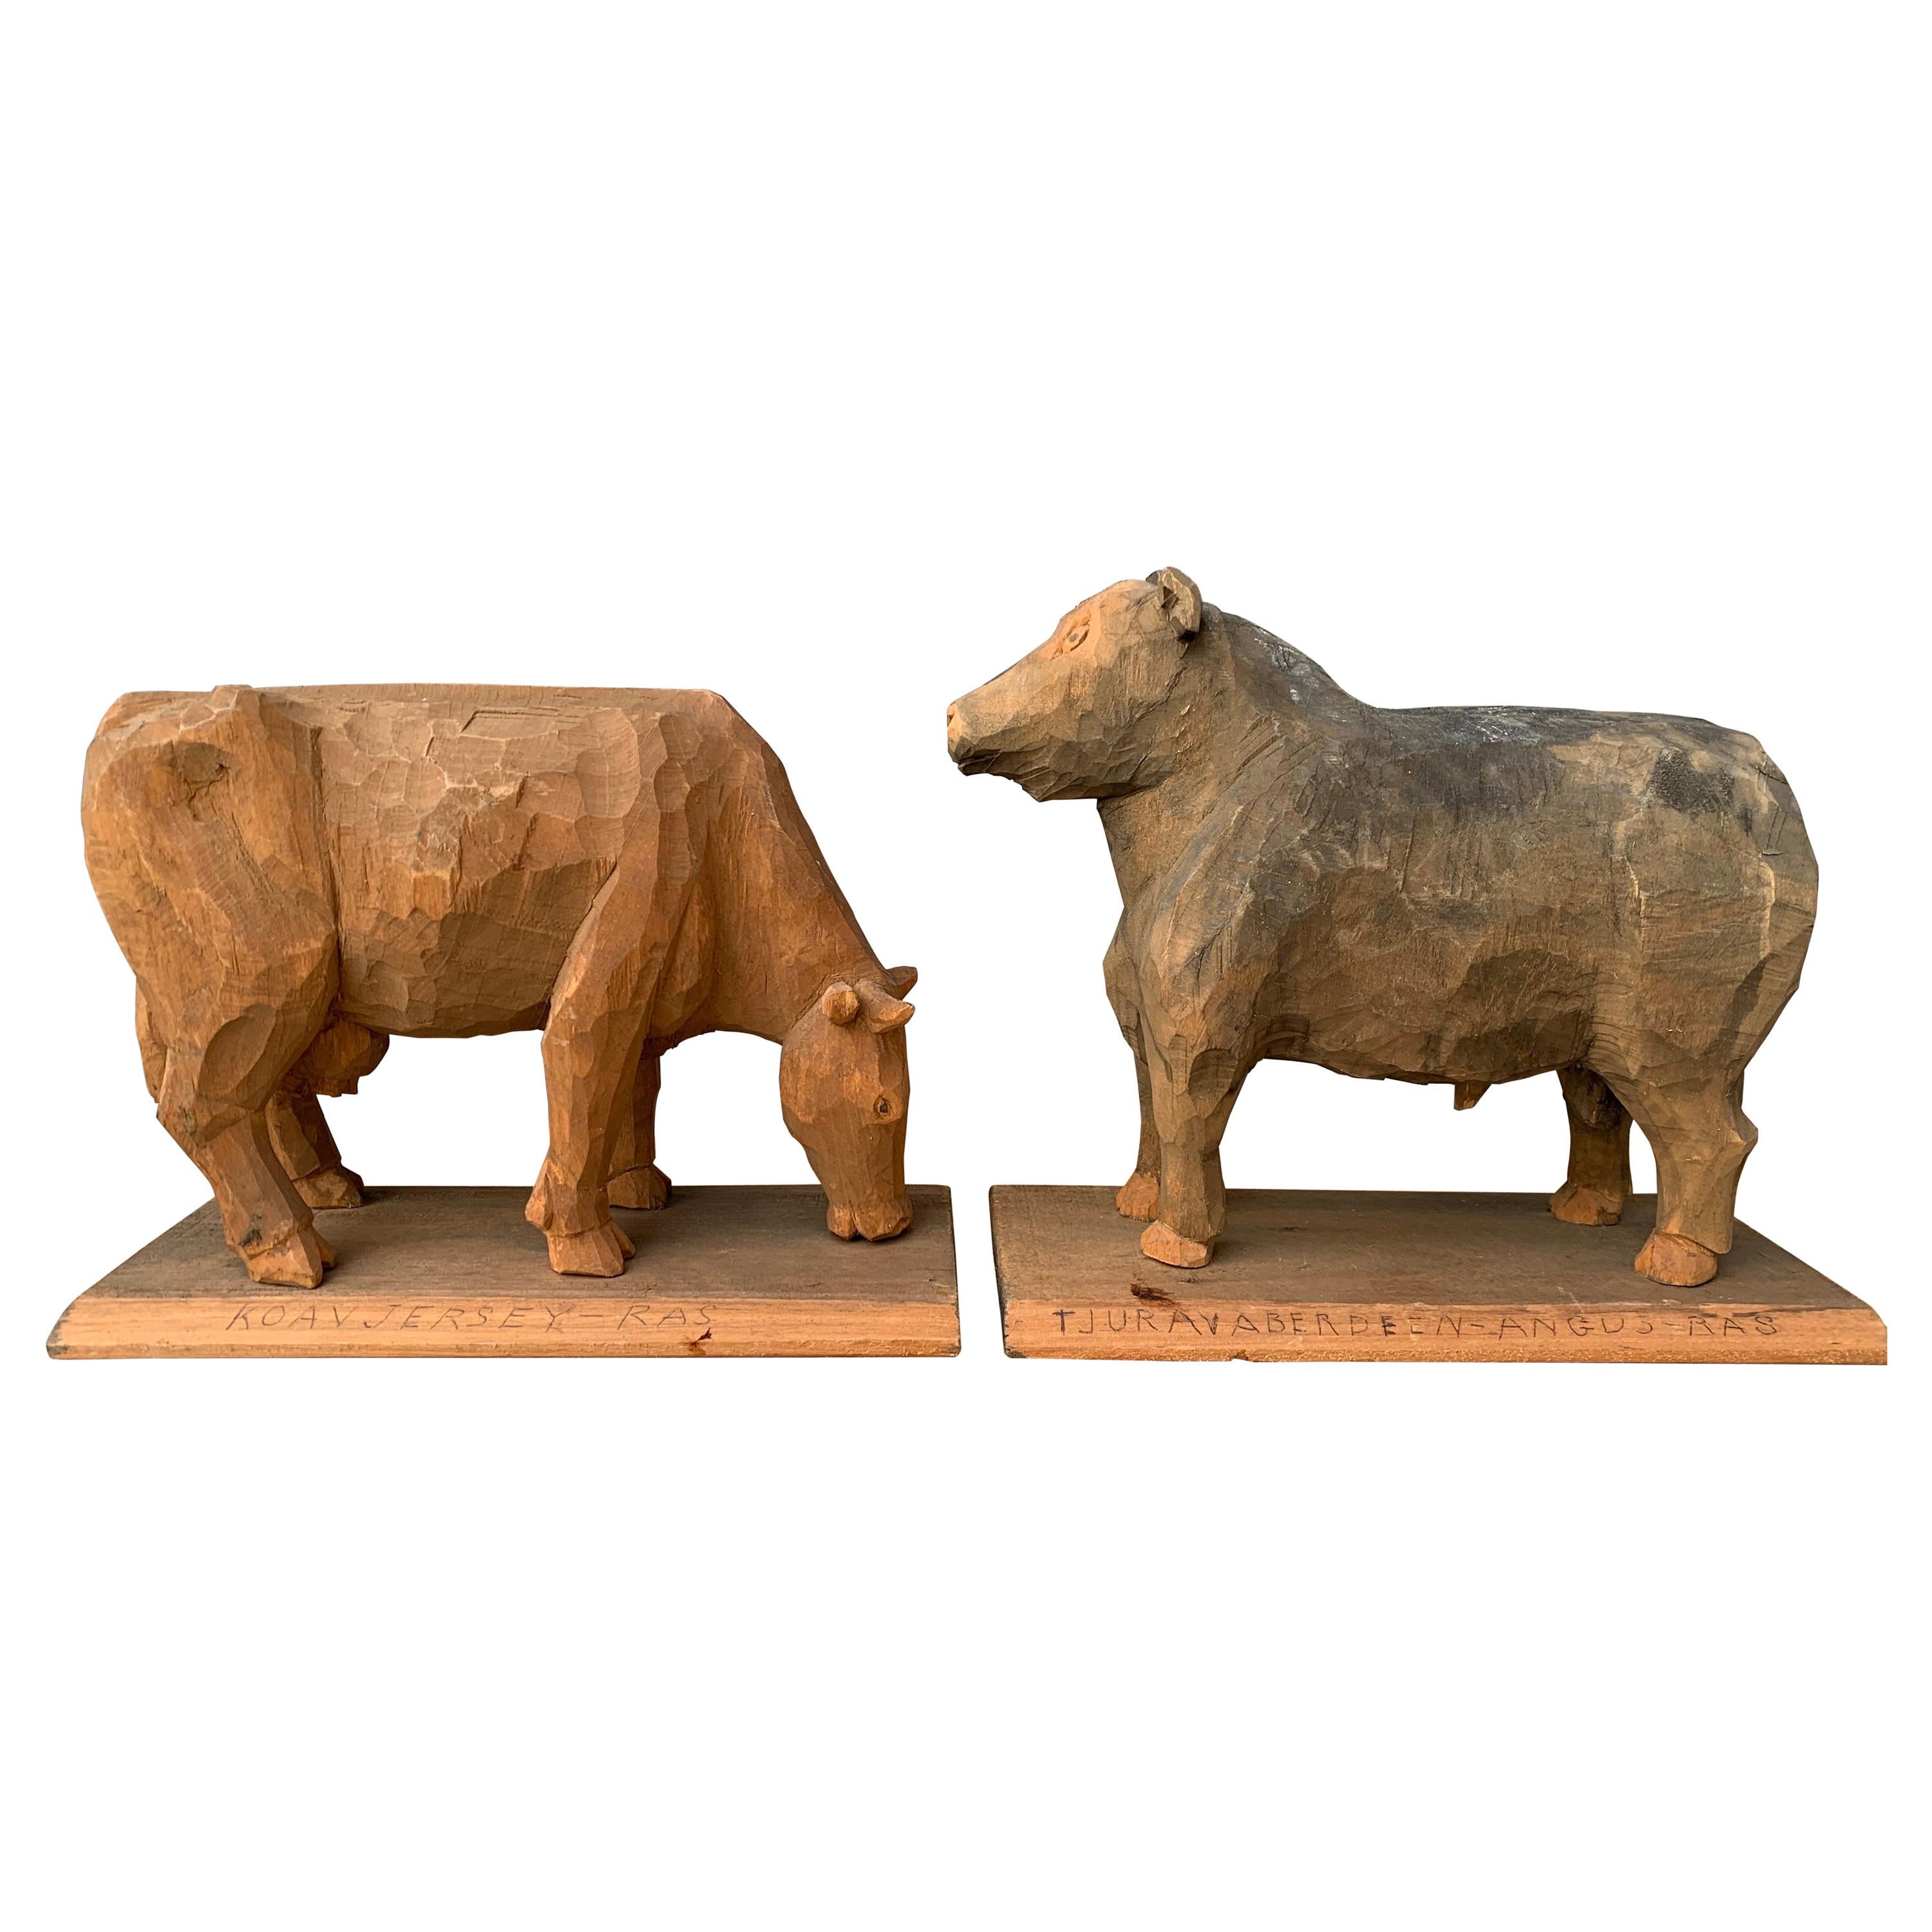 Two Swedish Carved Folk Art Sculptures of a Bull and Cow